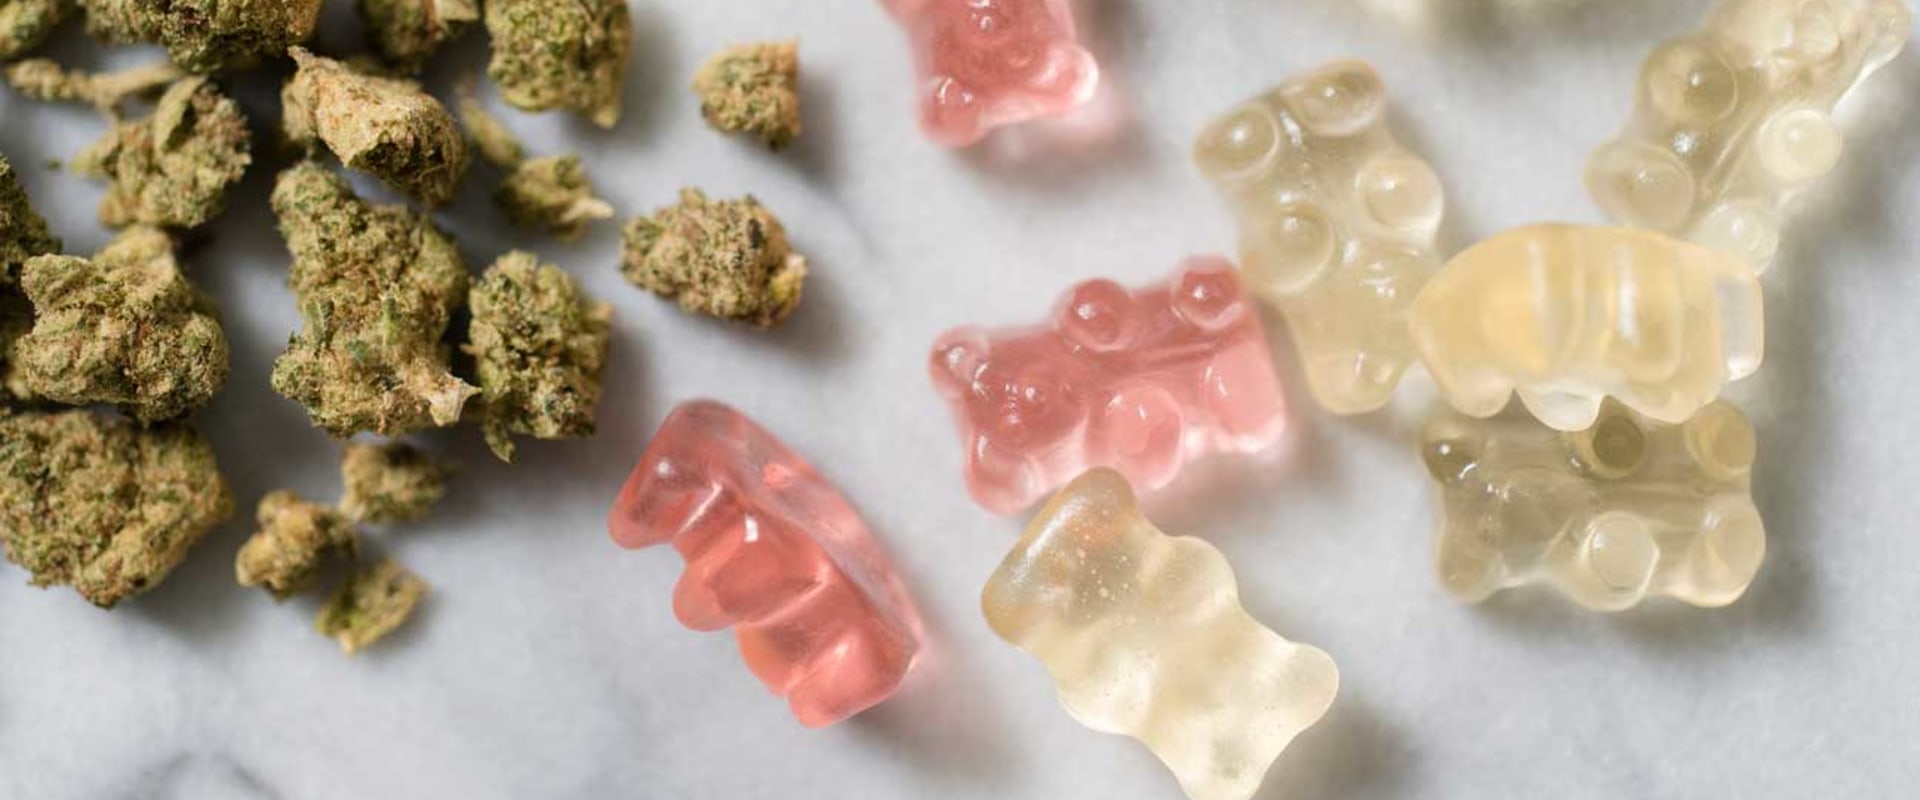 What to expect from sativa edibles?